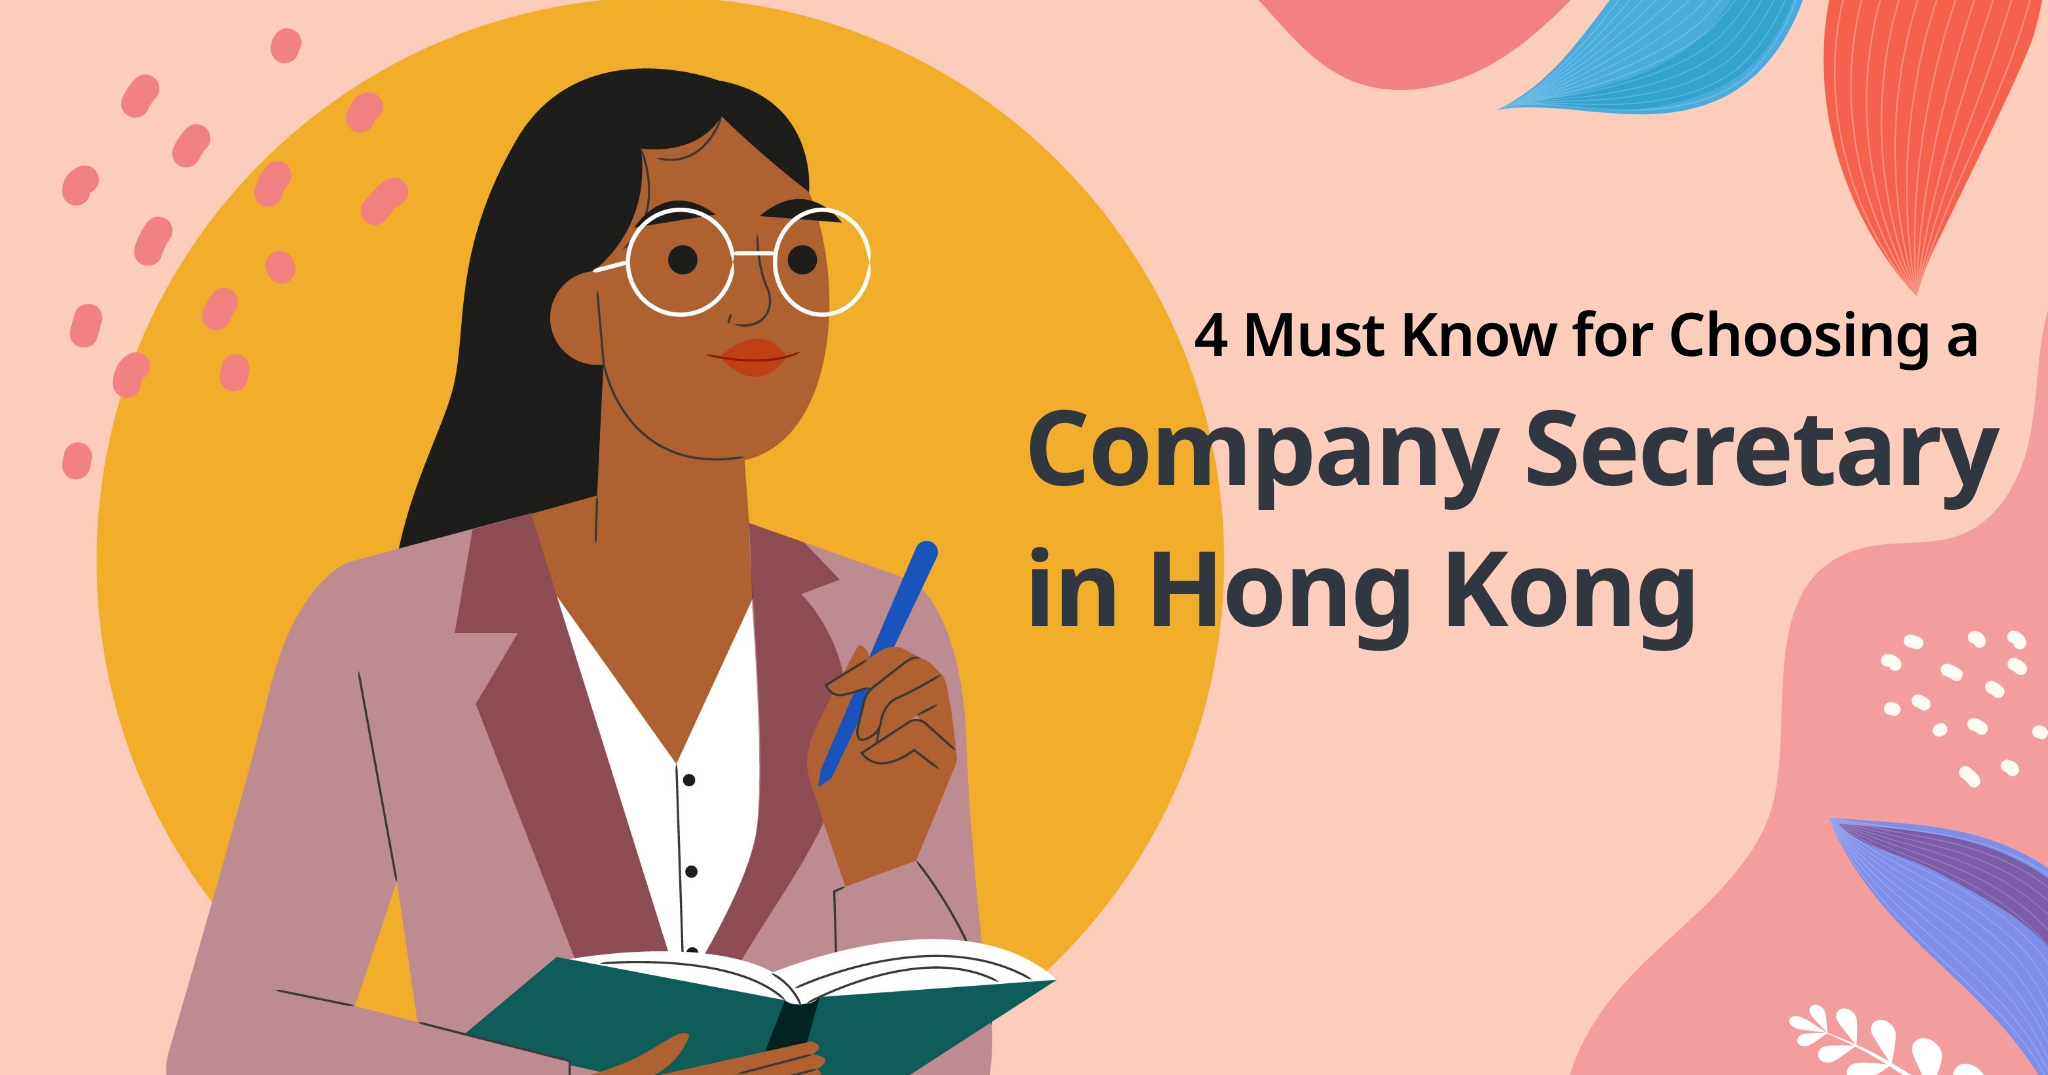 4 Must Know for Choosing a Company Secretary in Hong Kong